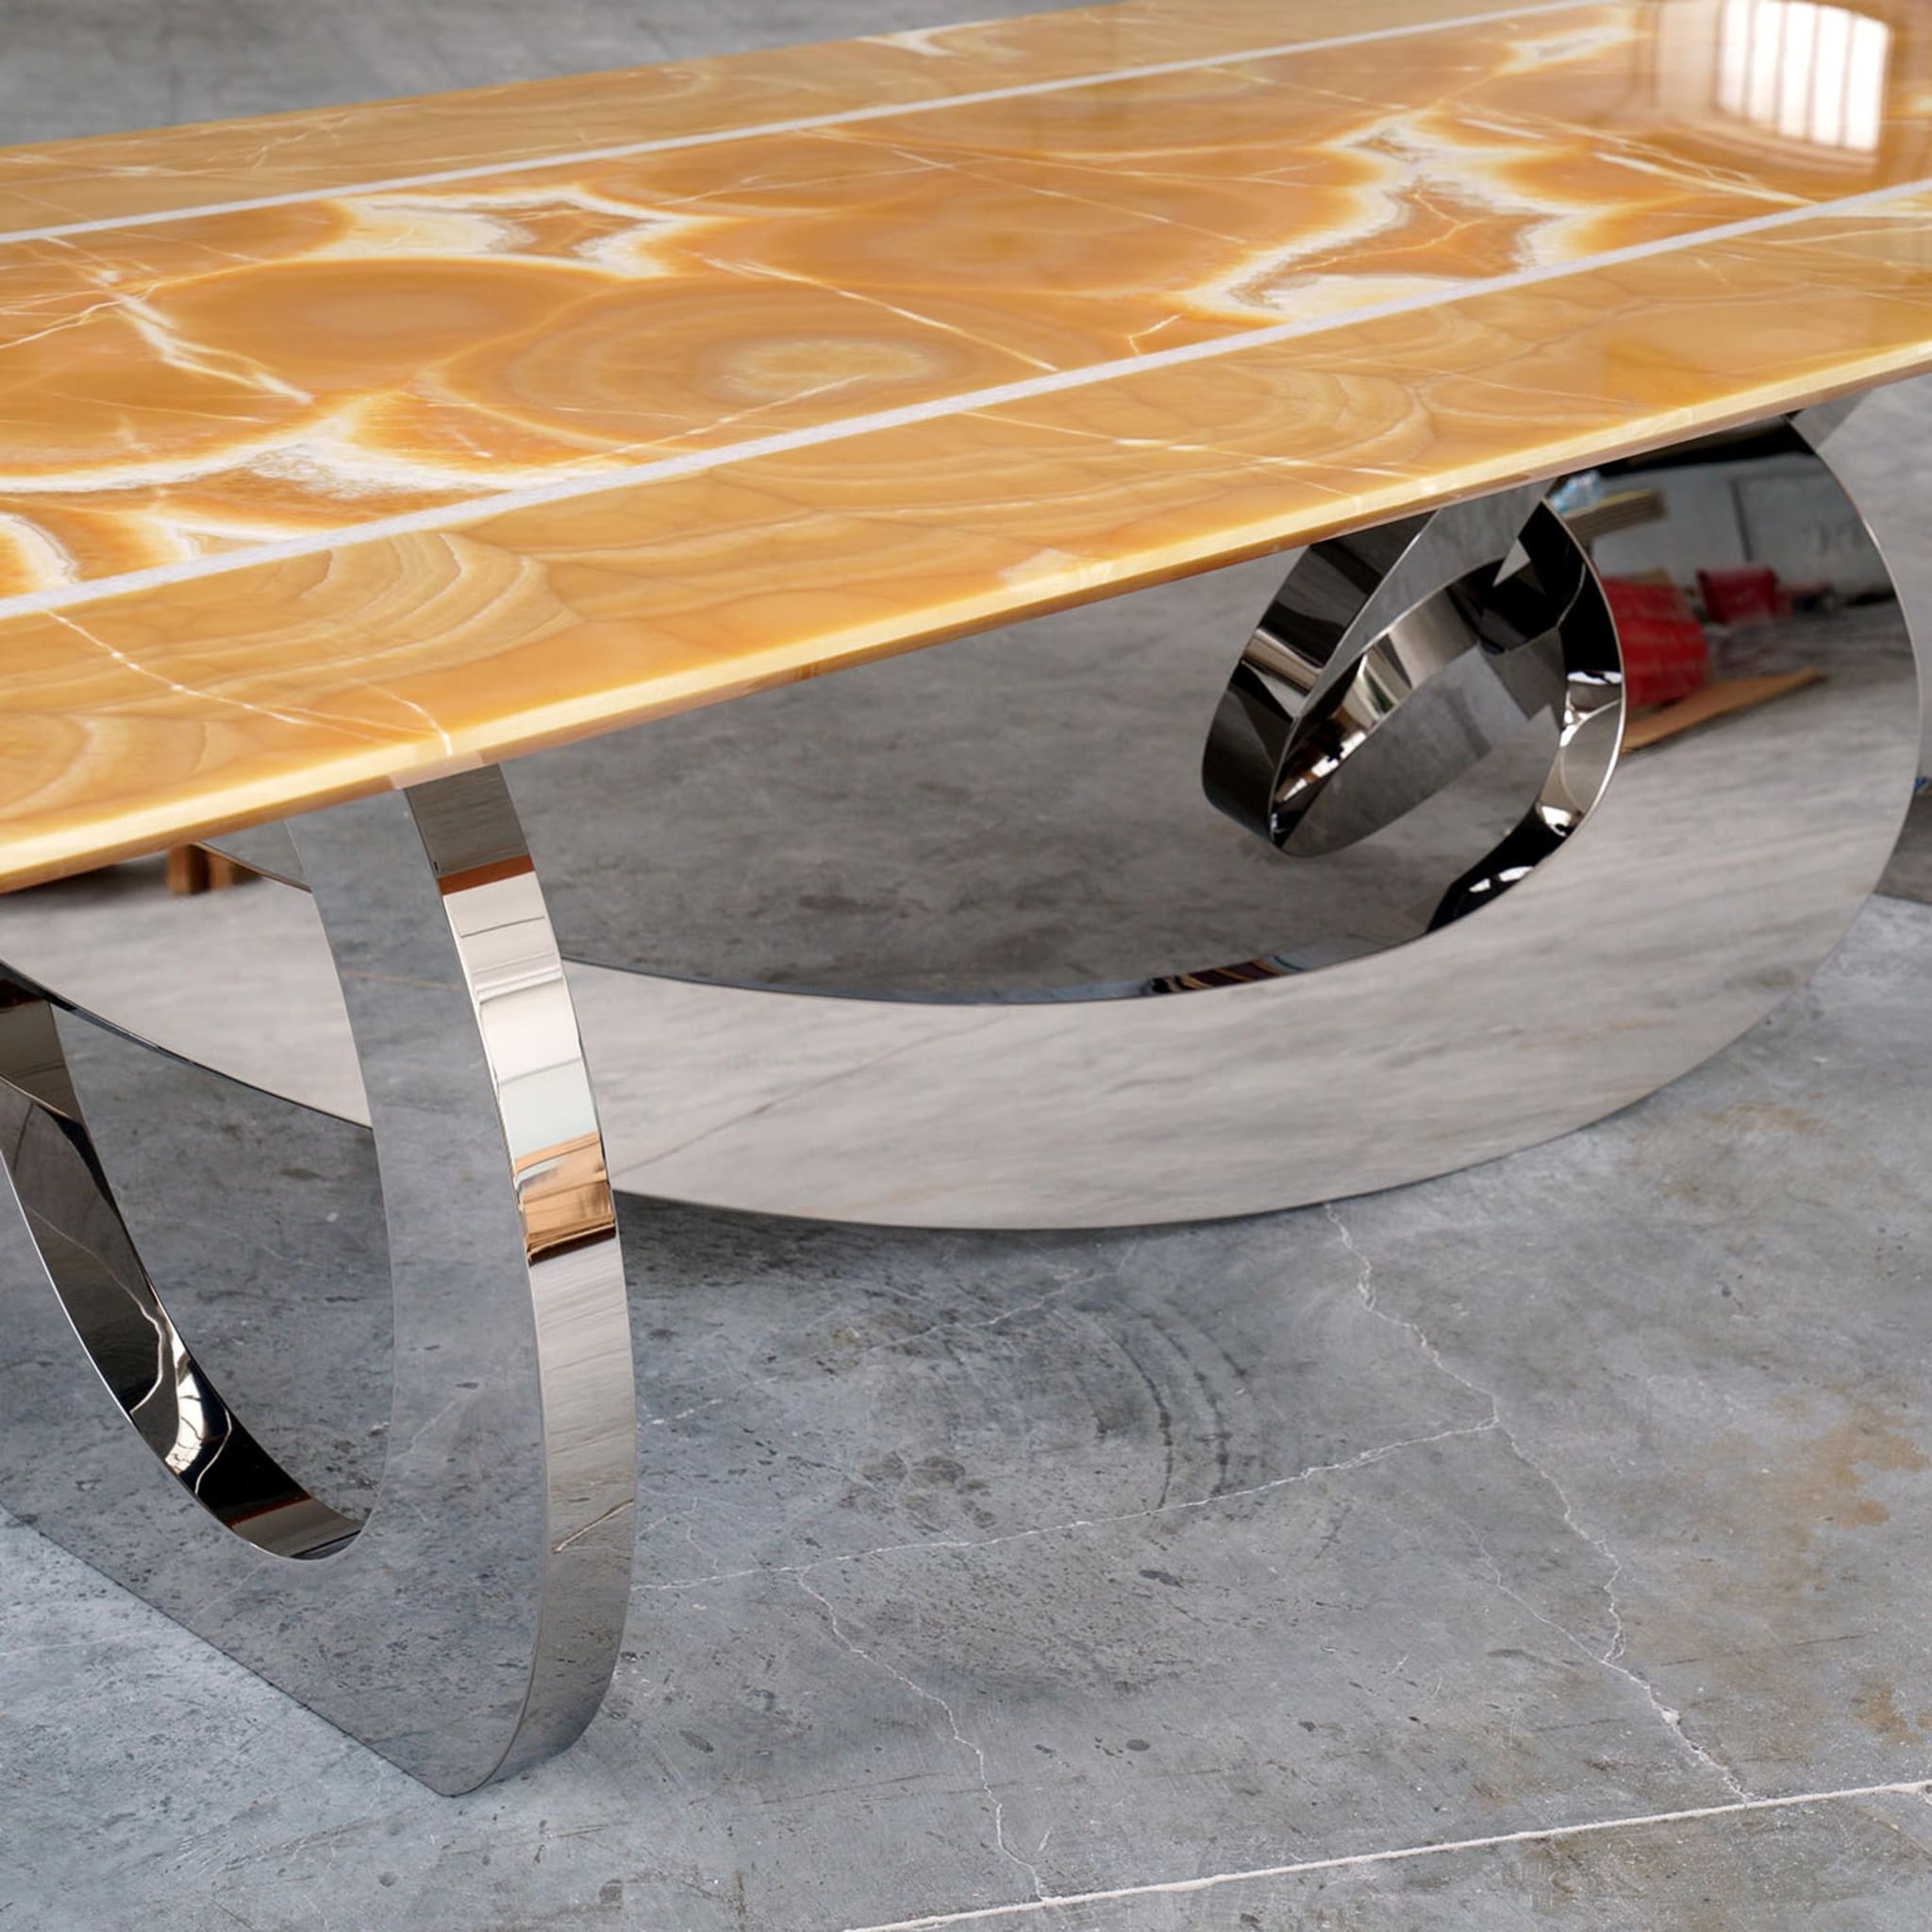 Bangles Onyx Dining Table - Alternative view 3